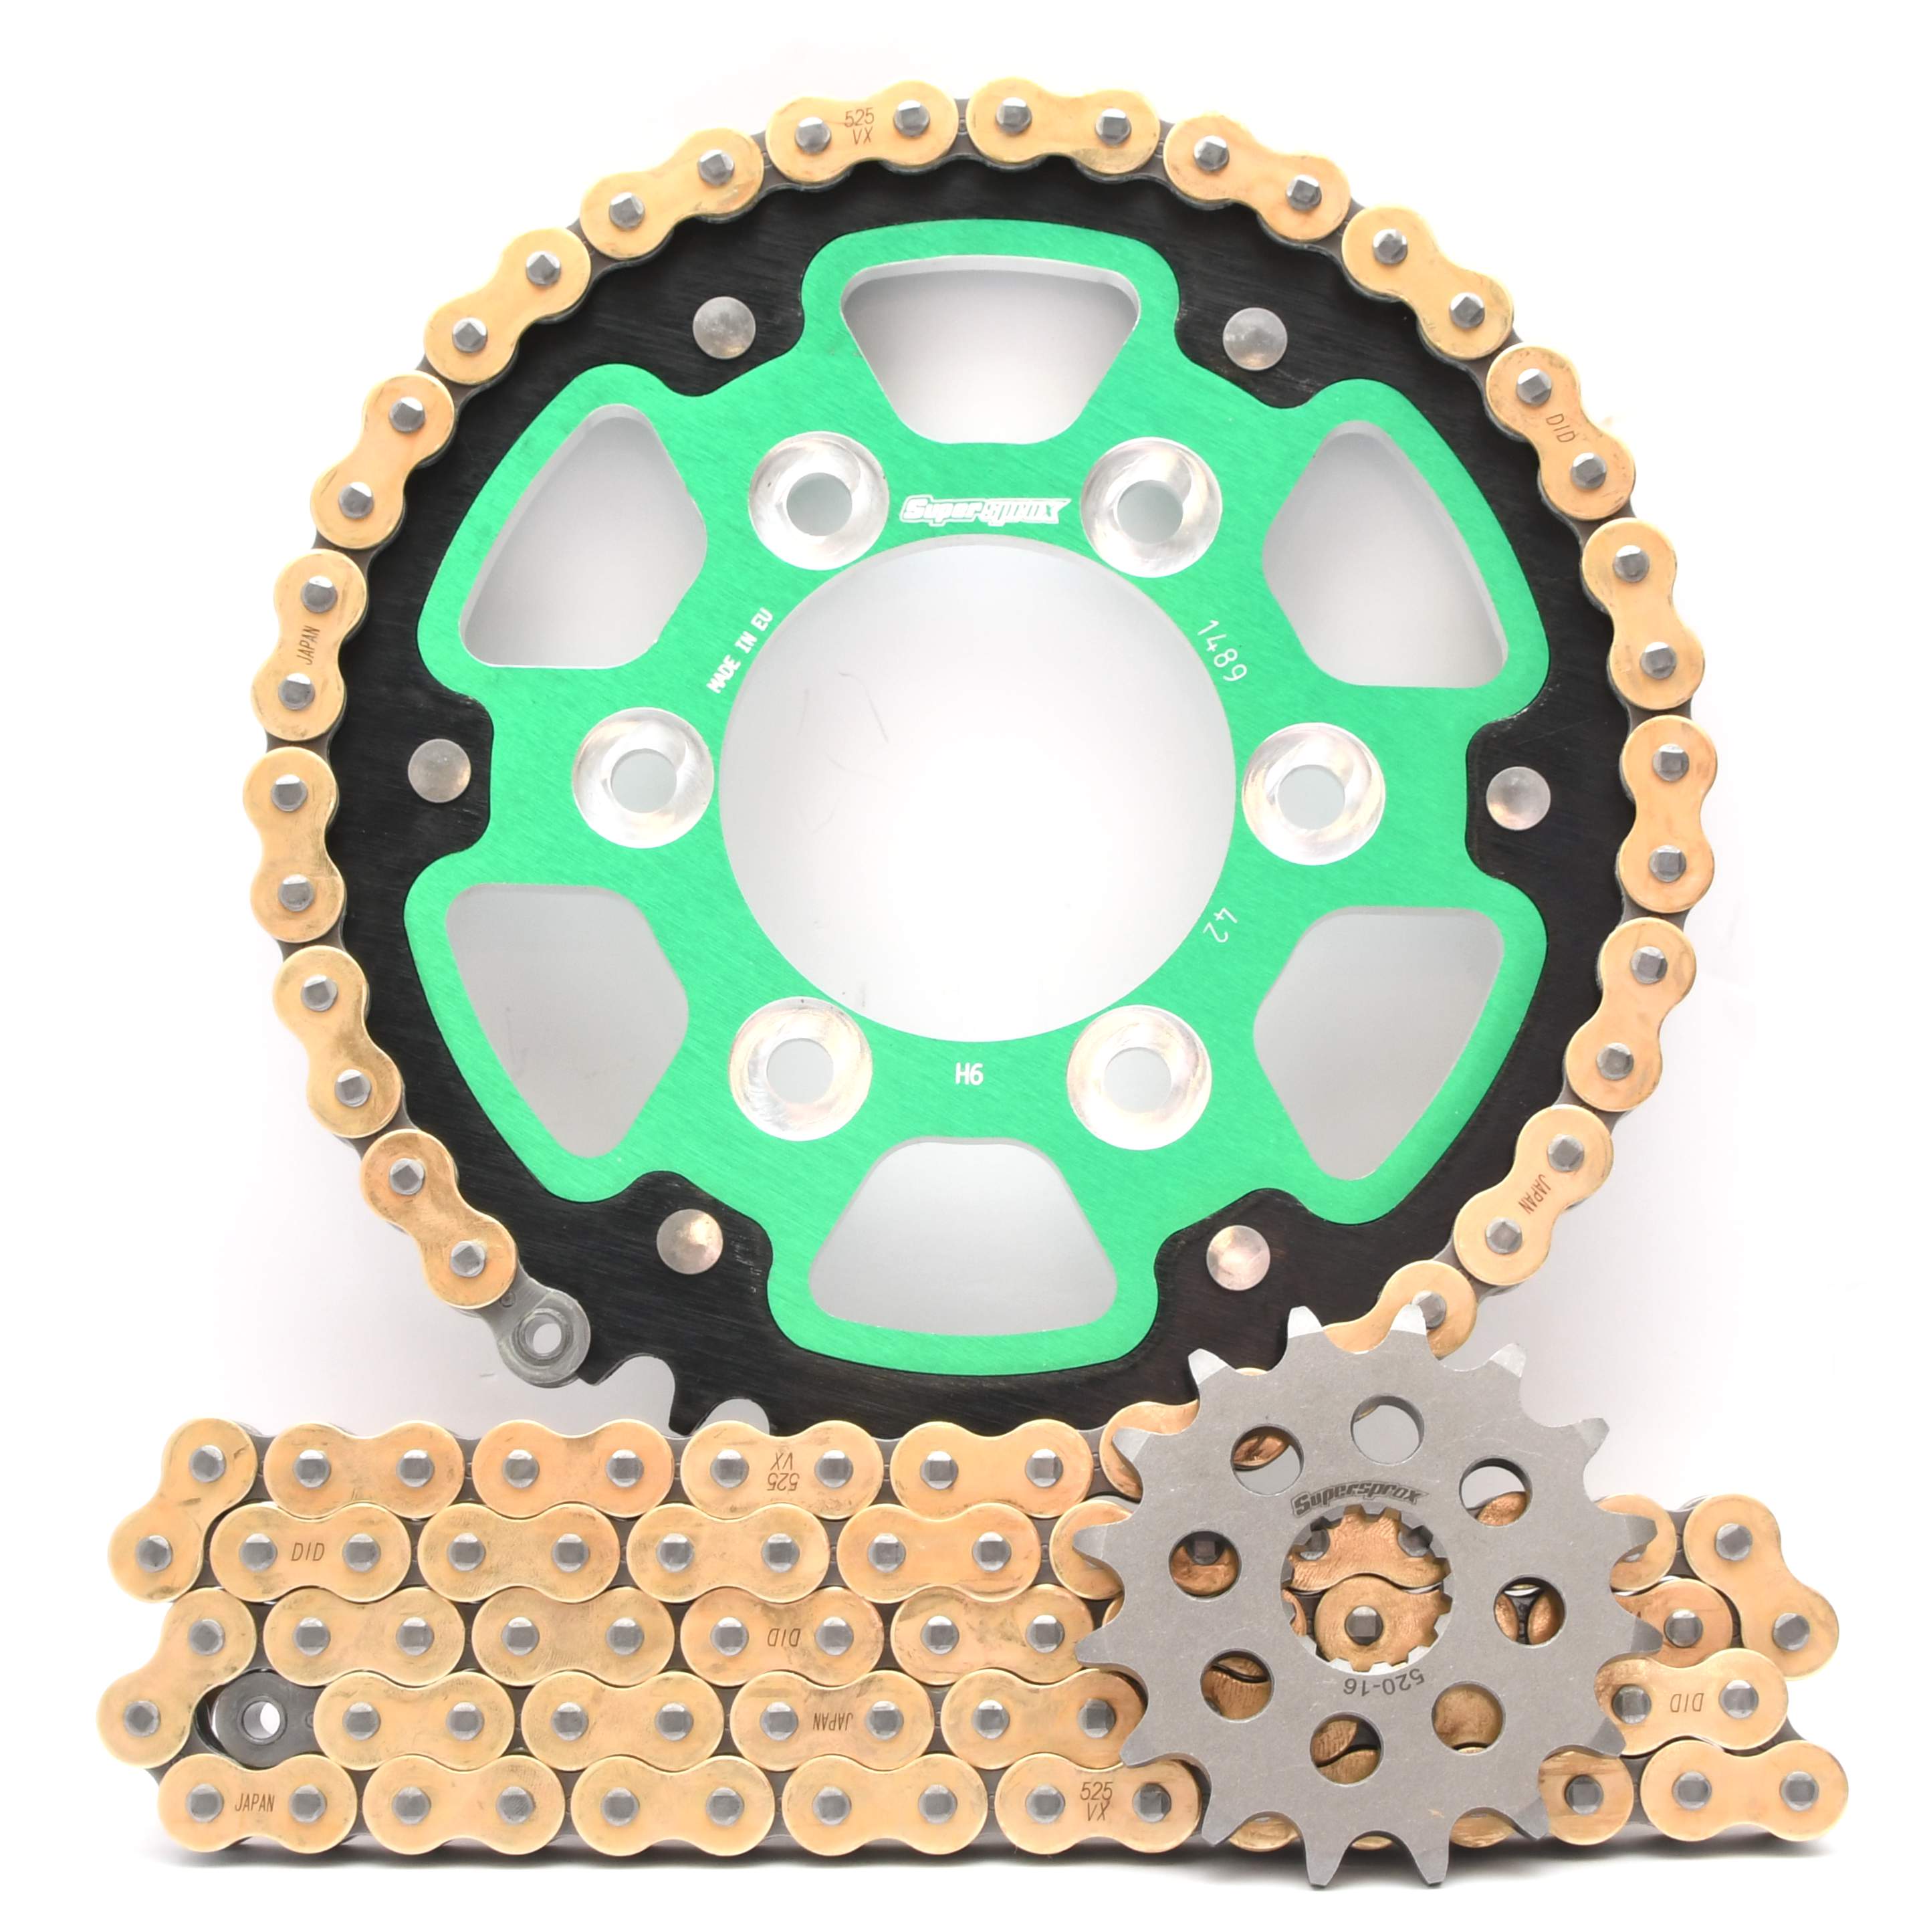 Supersprox Chain & Sprocket Kit for Kawasaki ZX7R 96-03 - Choose Your Gearing